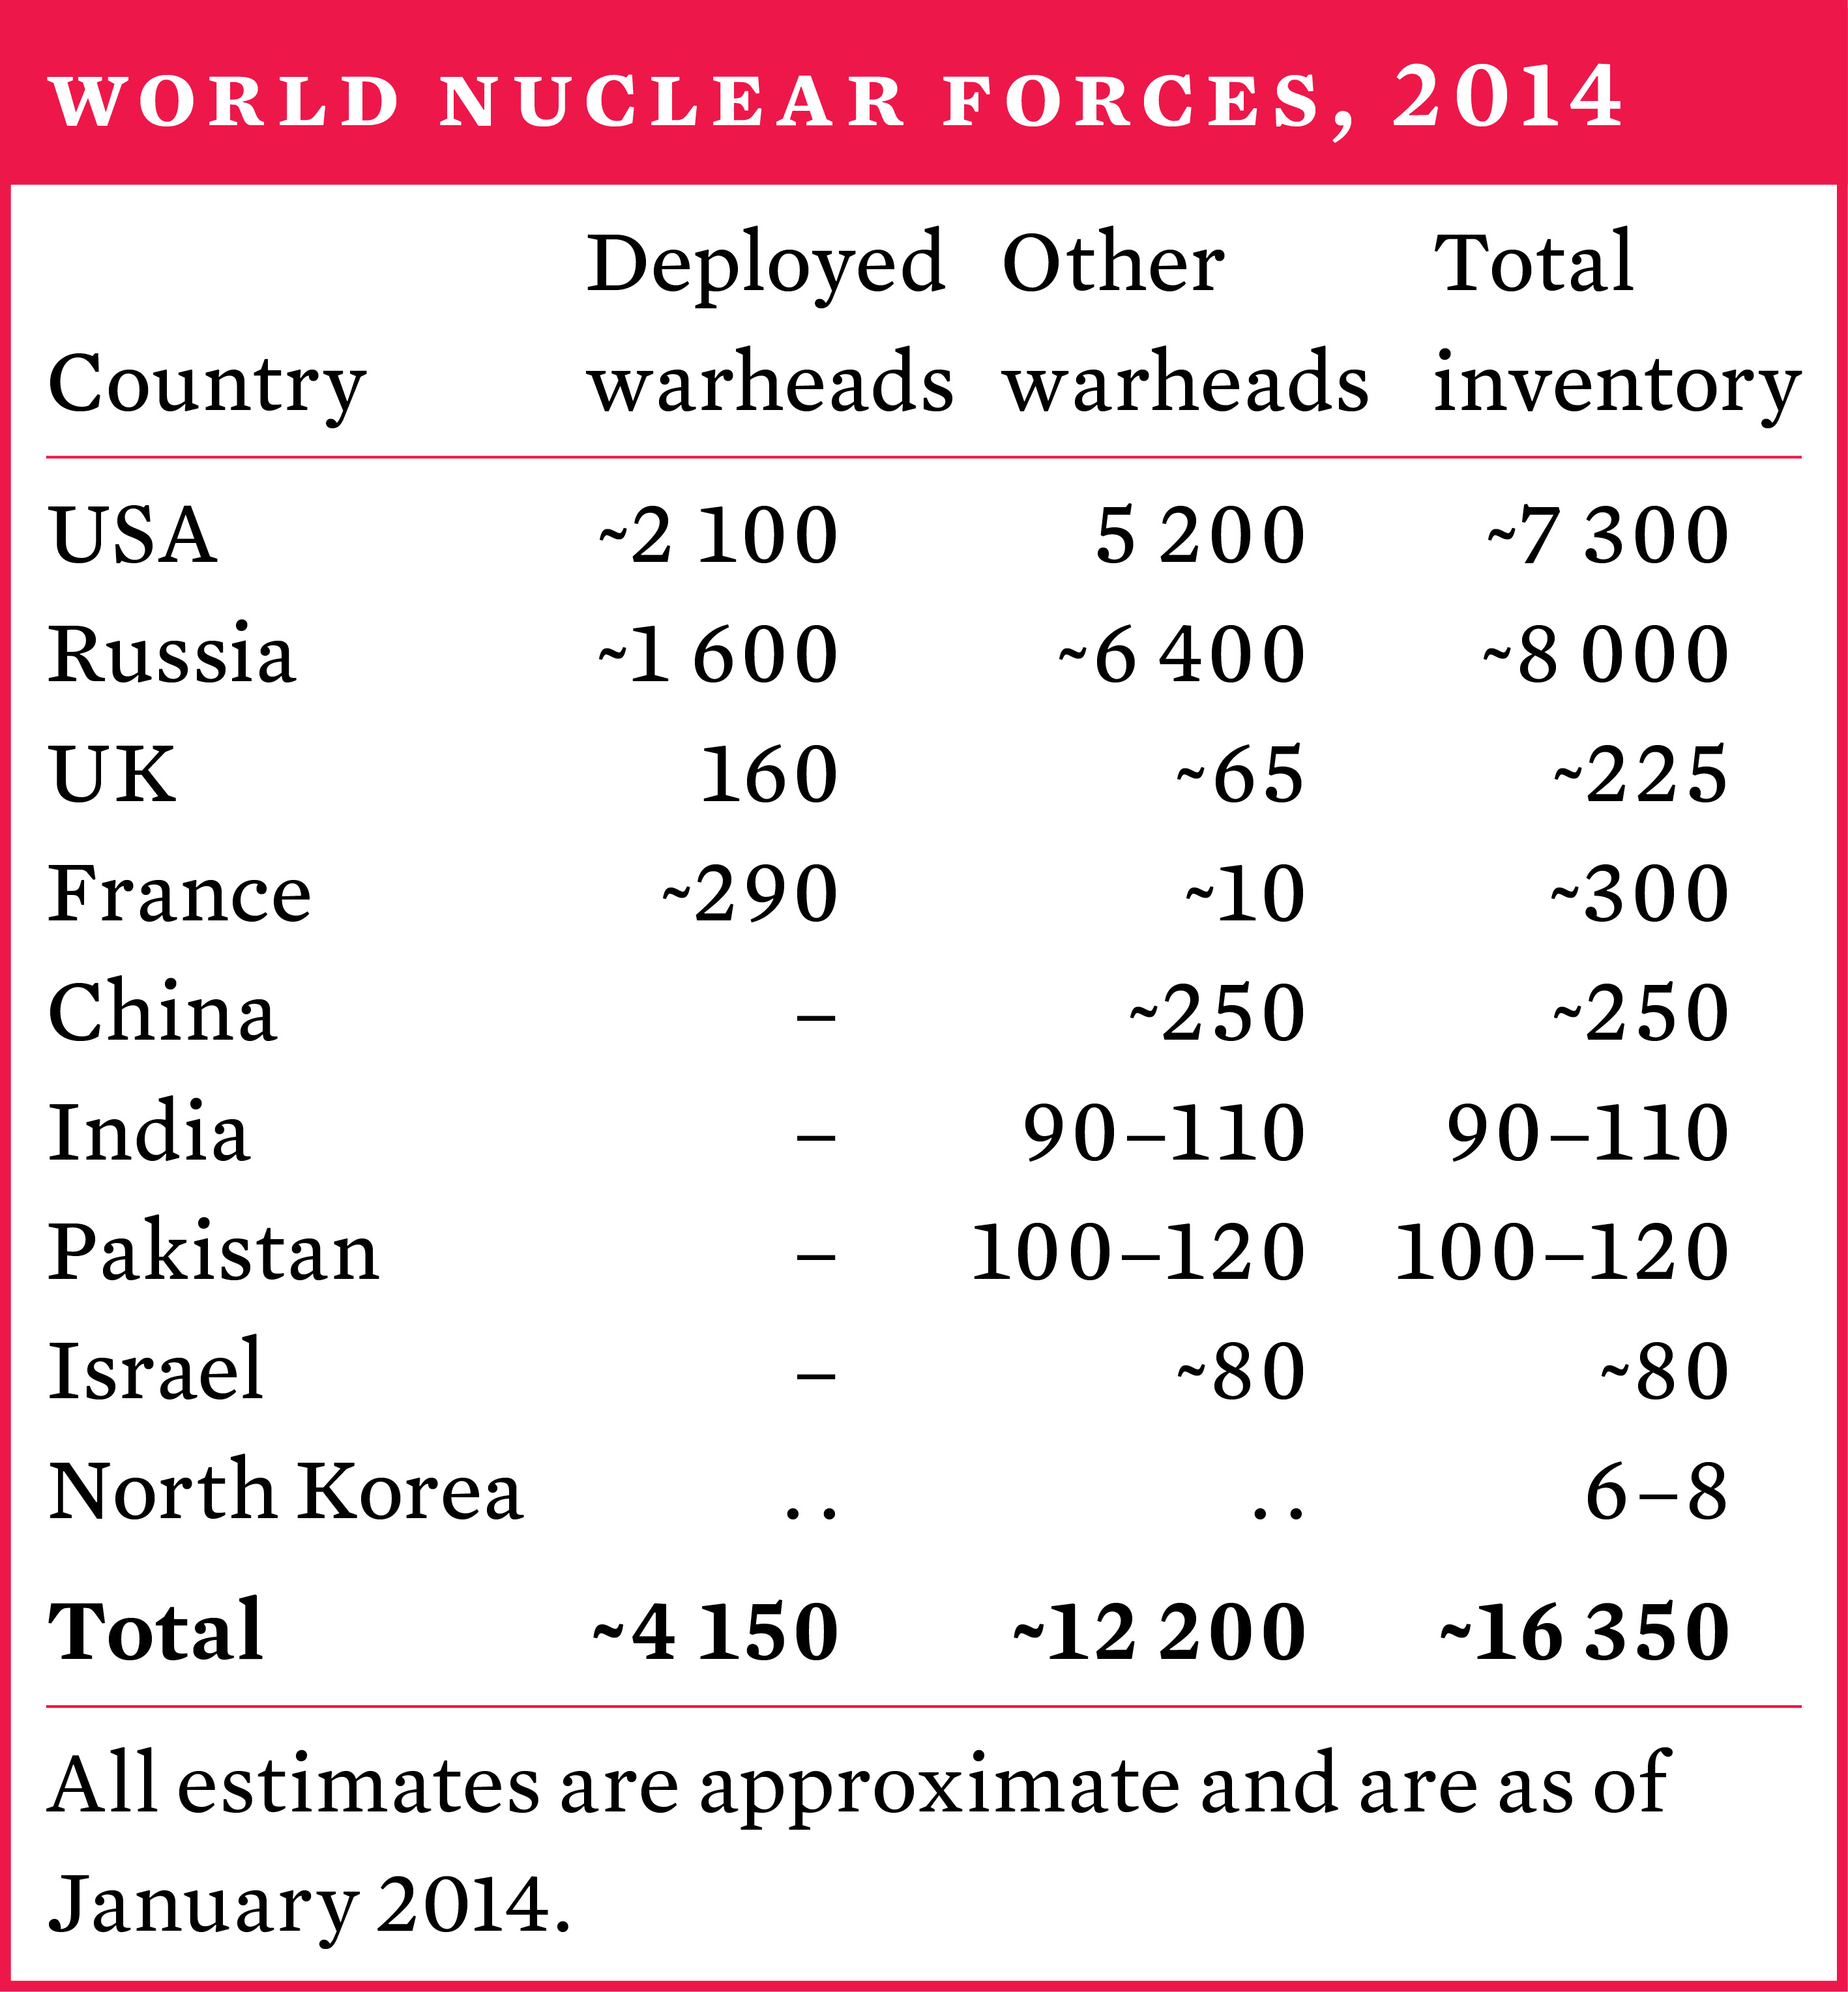 World nuclear forces, 2014